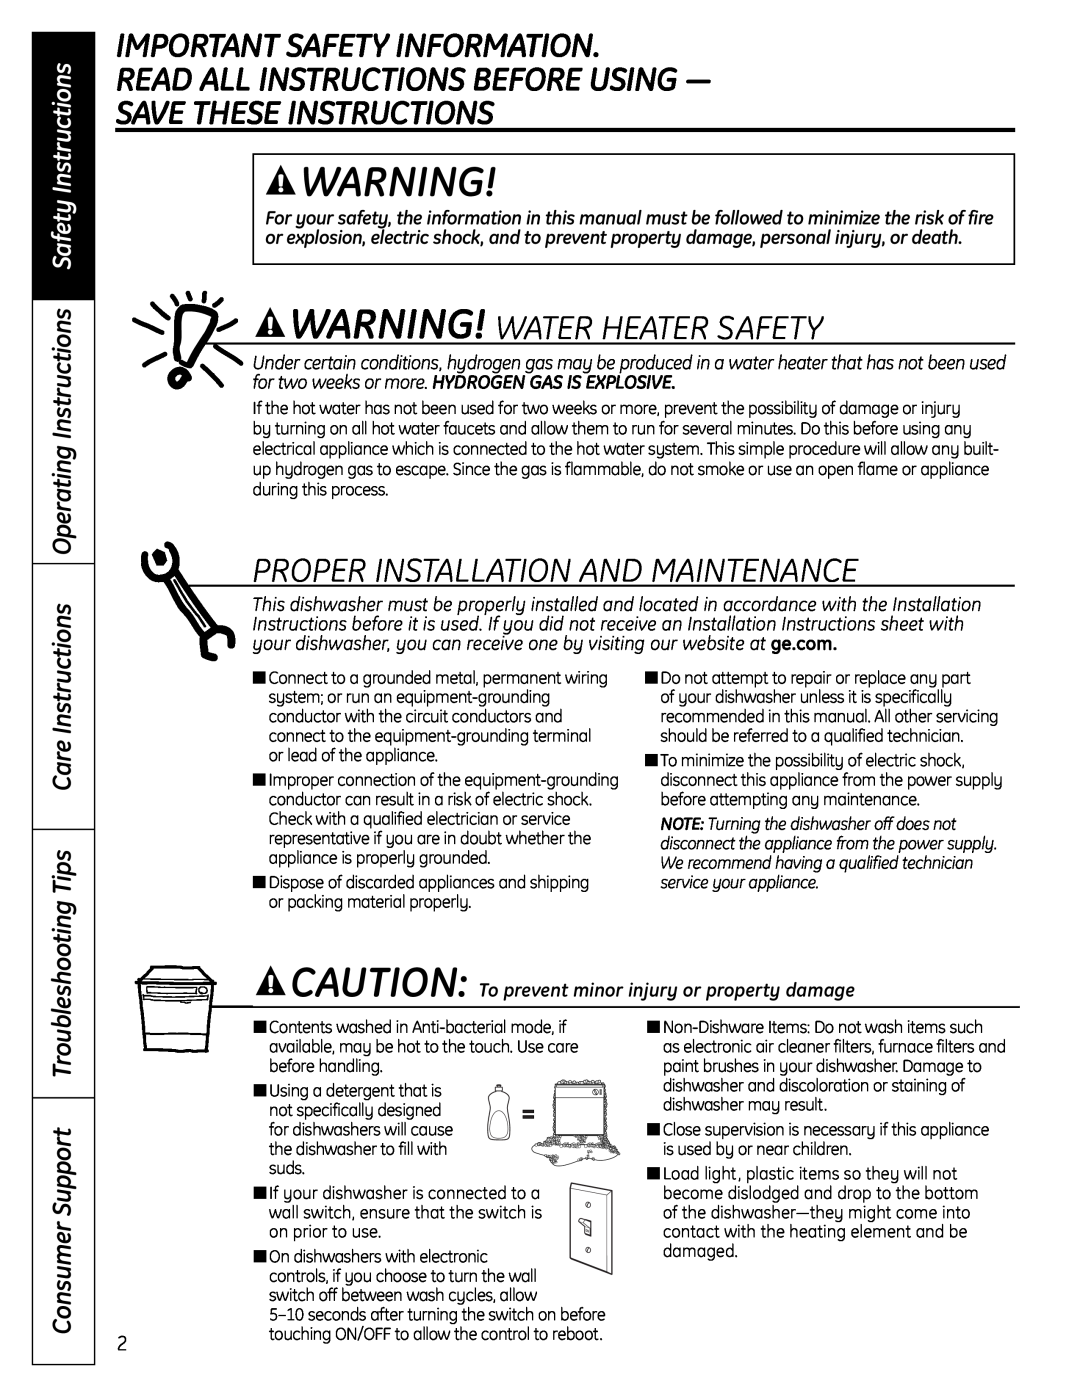 GE 165D4700P371 Important Safety Information Read All Instructions Before Using, Save These Instructions, Tips Care 